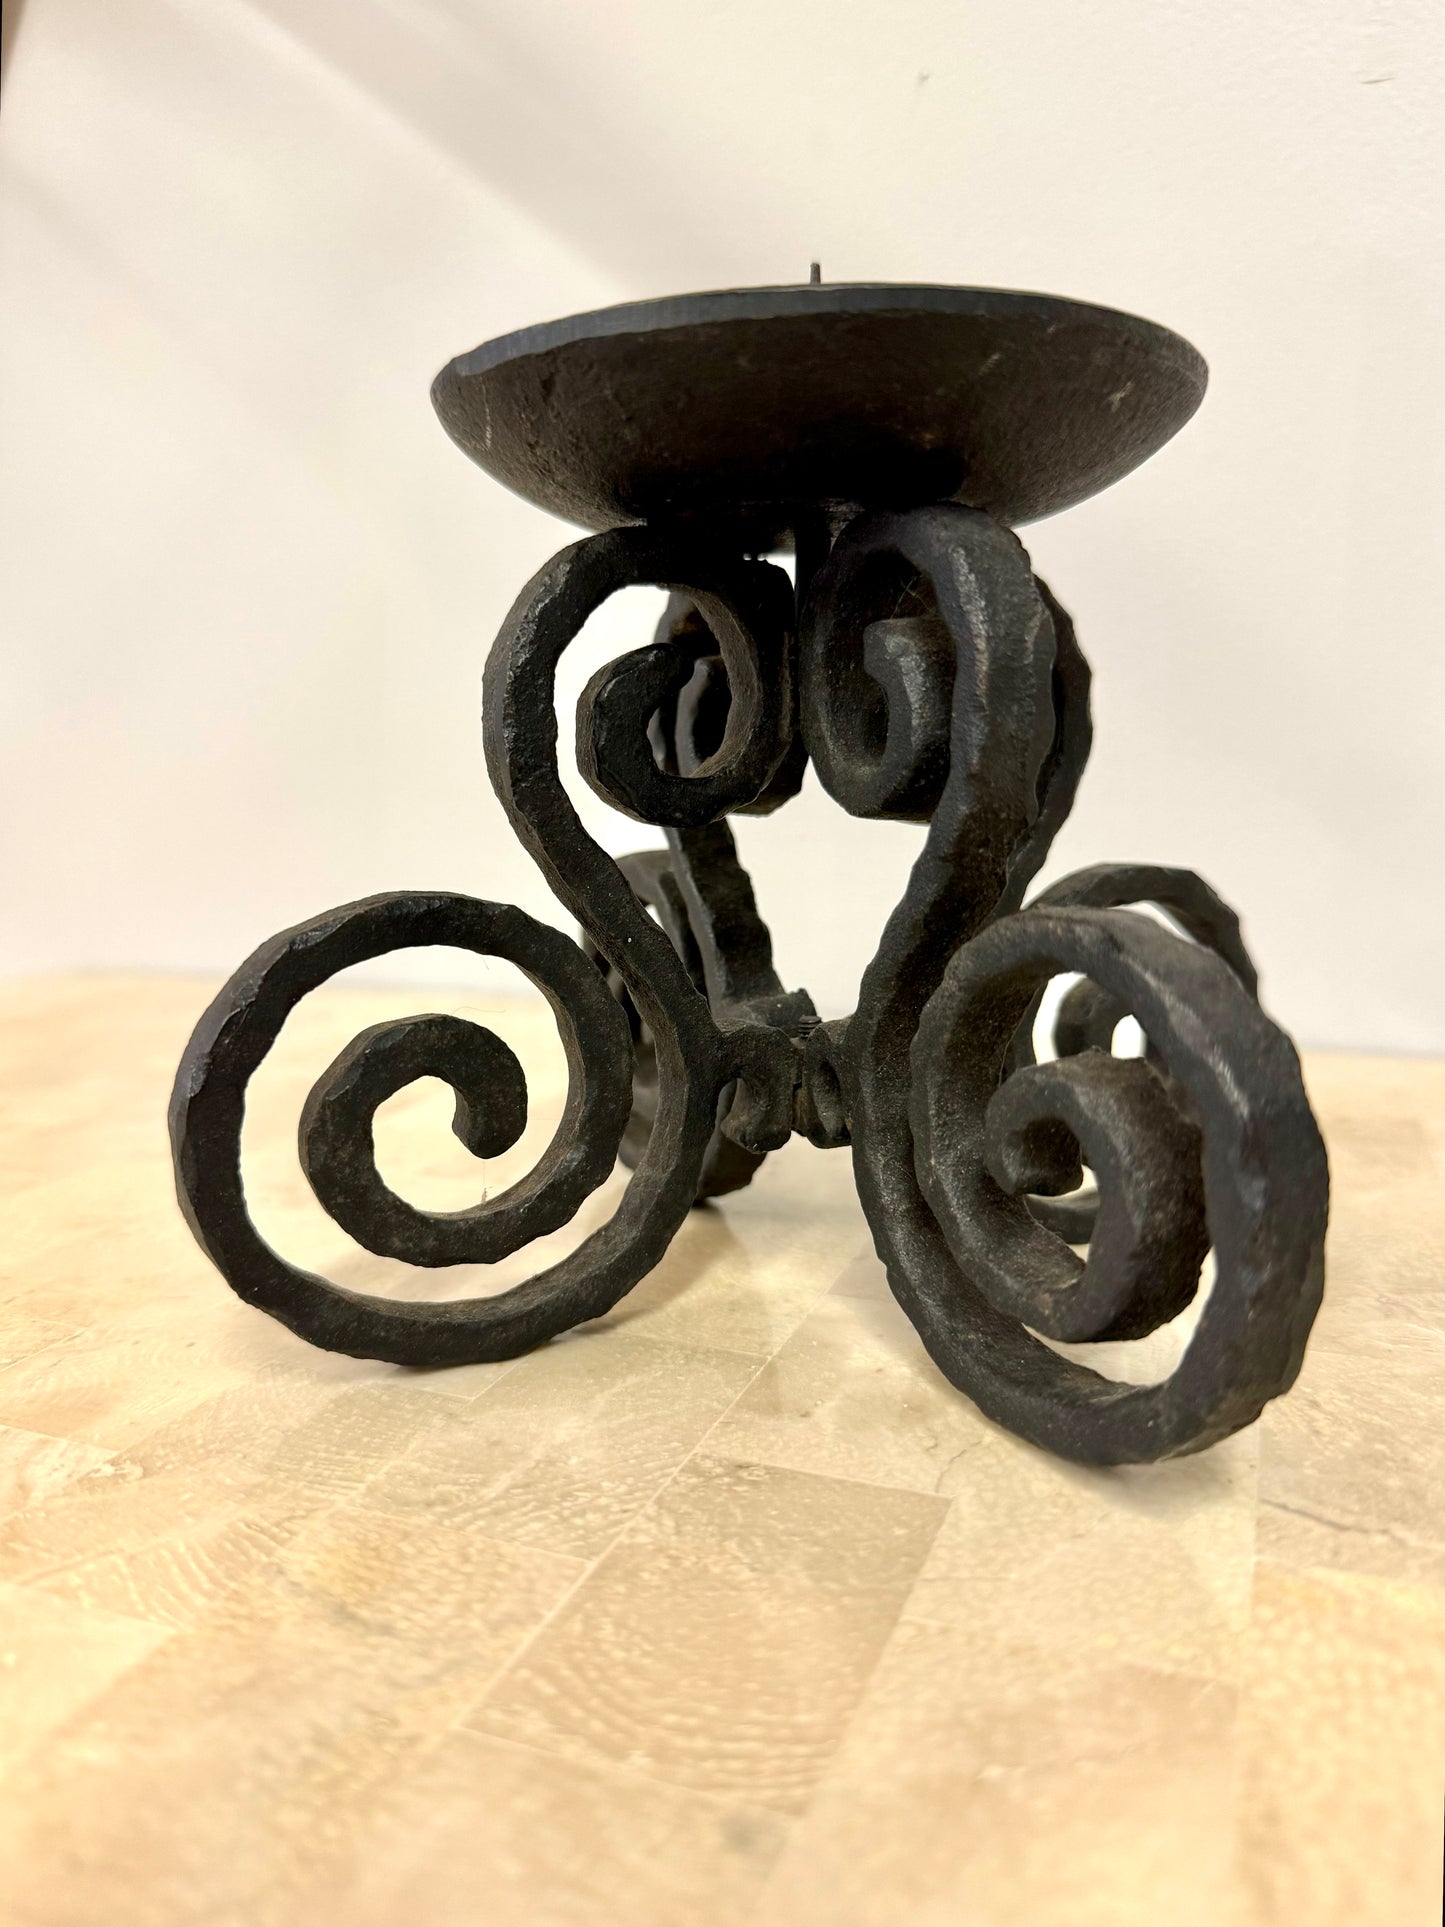 Vintage Rustic Wrought Iron Pillar Candle Holder